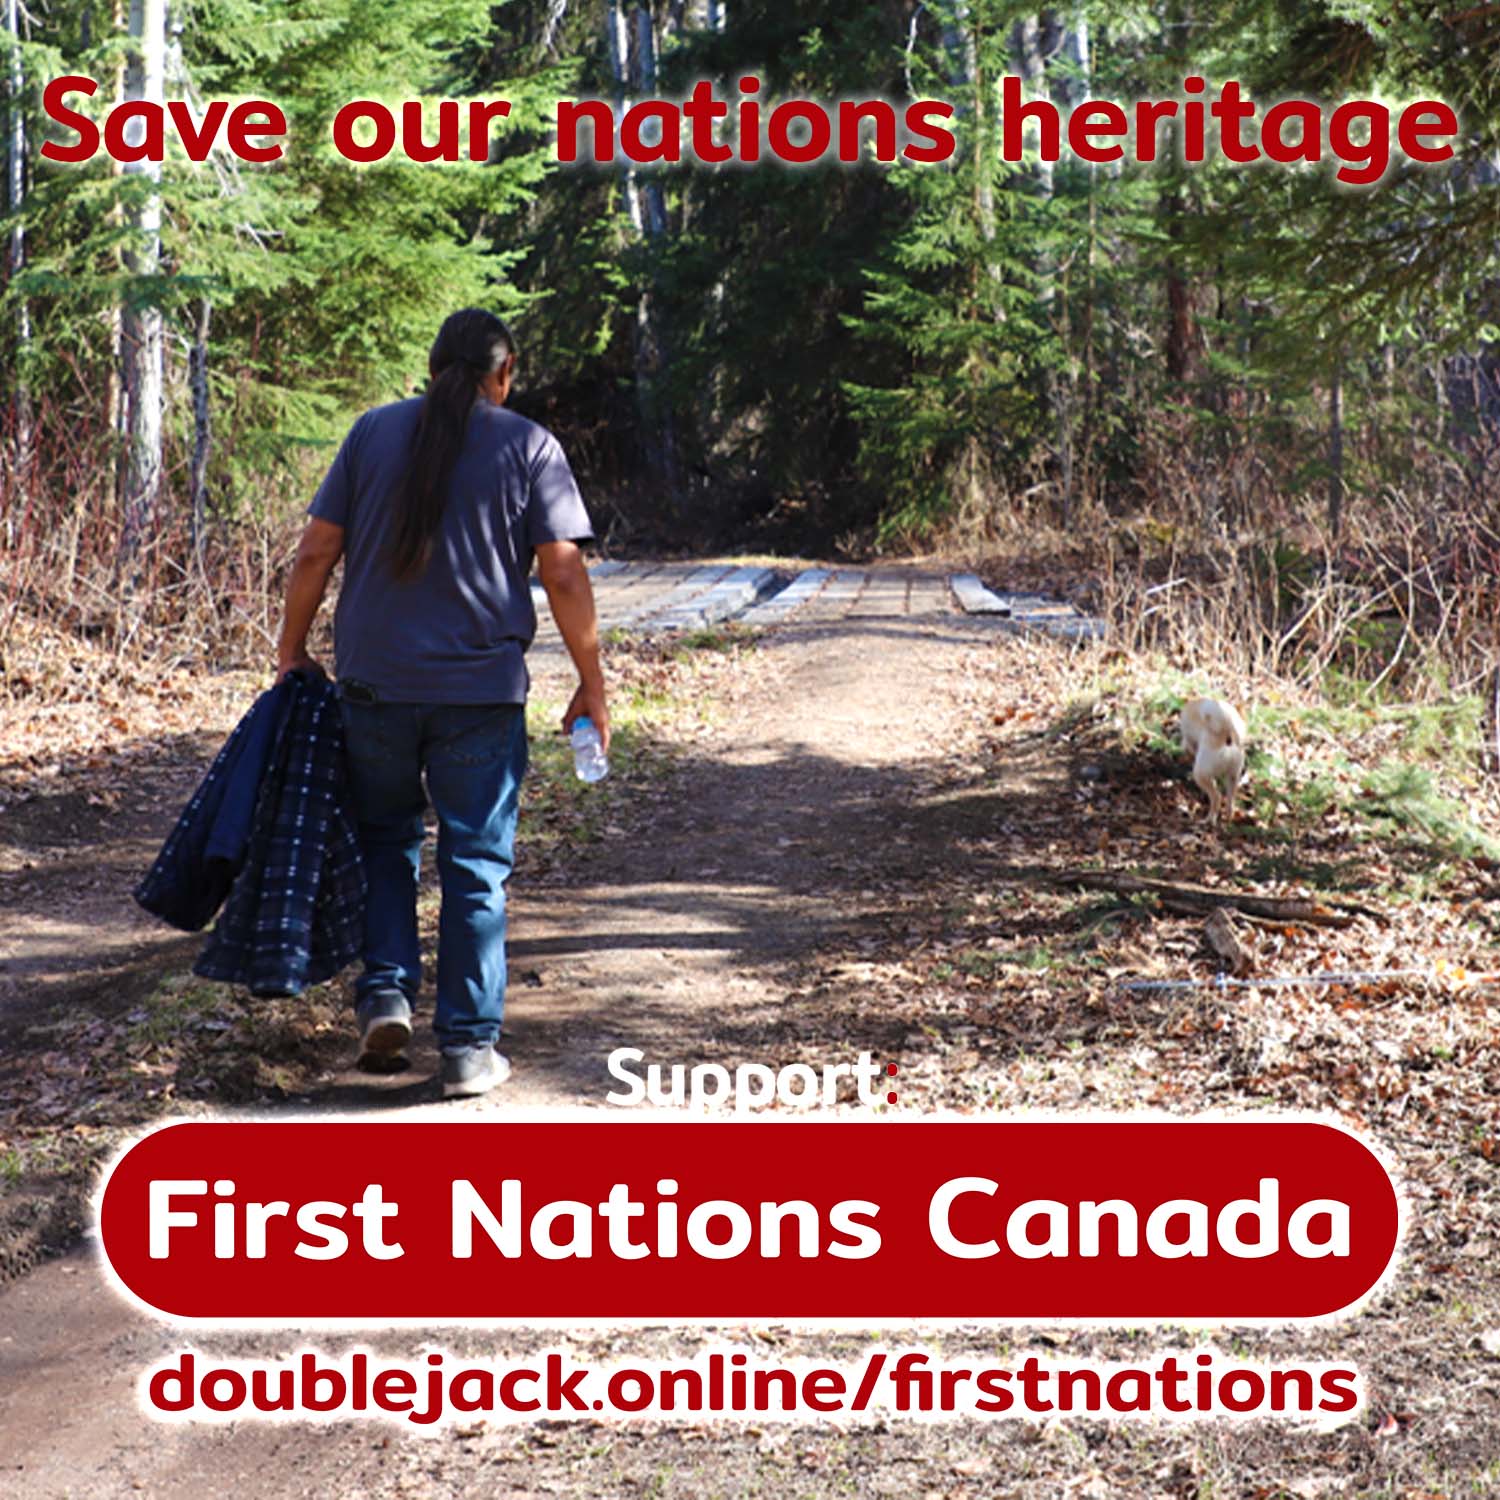 doublejack supports first nations canada